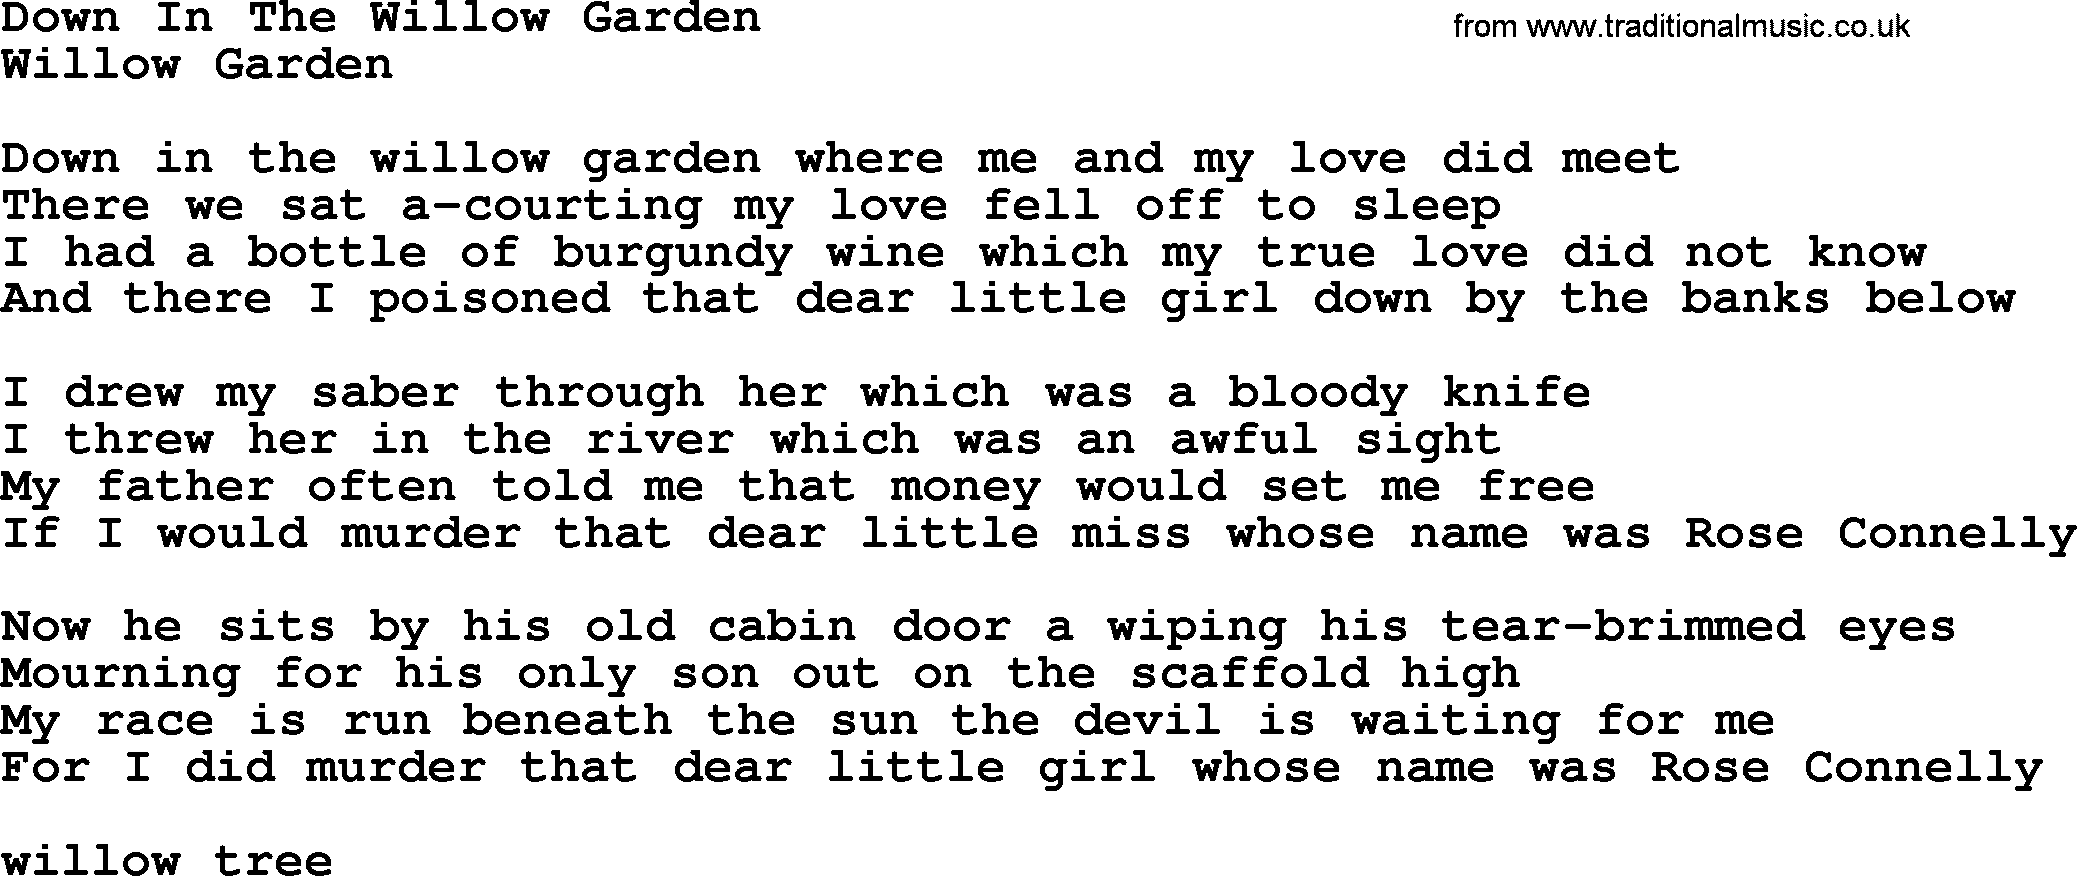 The Byrds song Down In The Willow Garden, lyrics